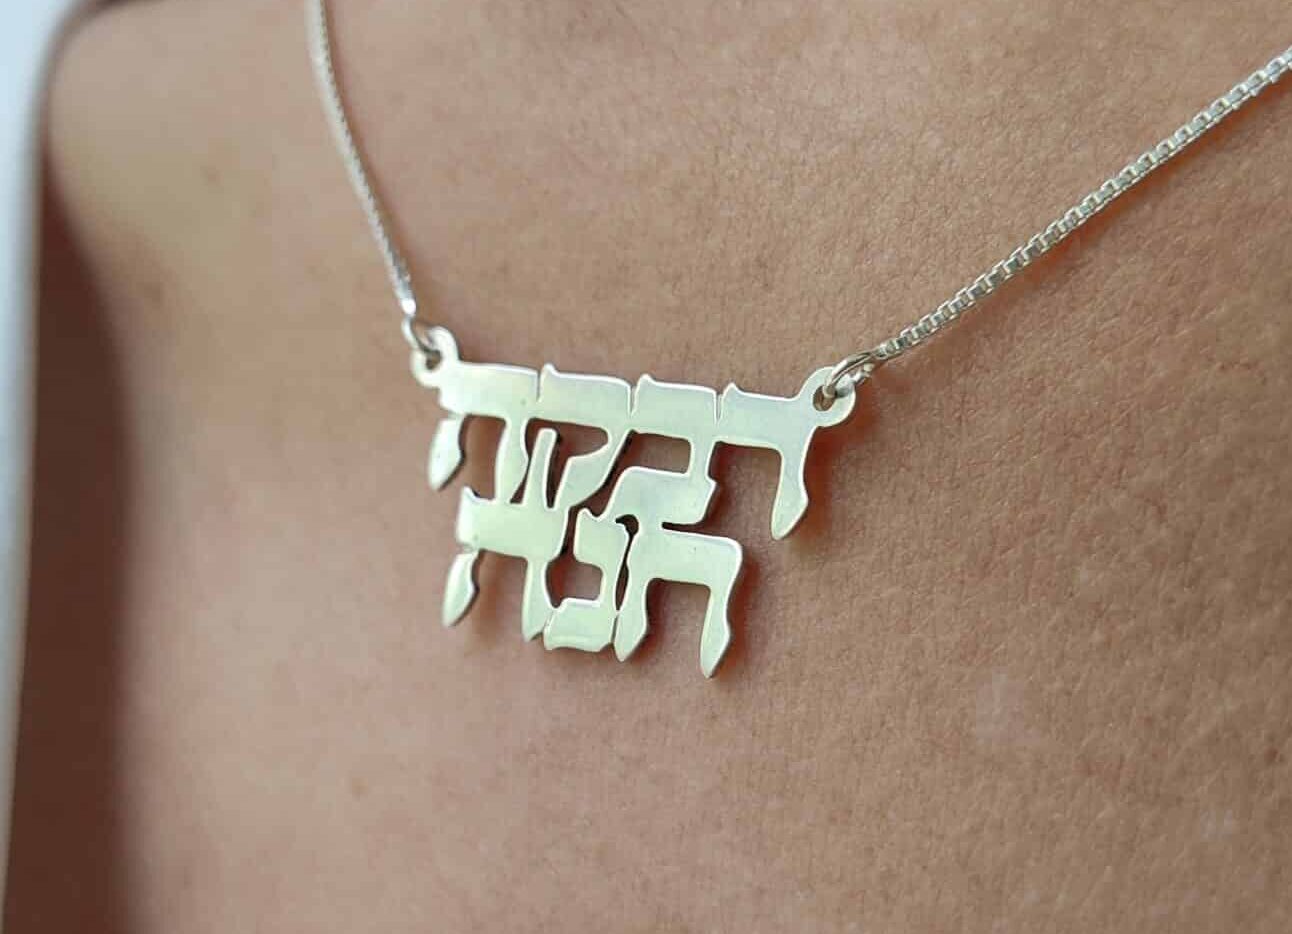 Full Hebrew Name Classic Gold Necklace